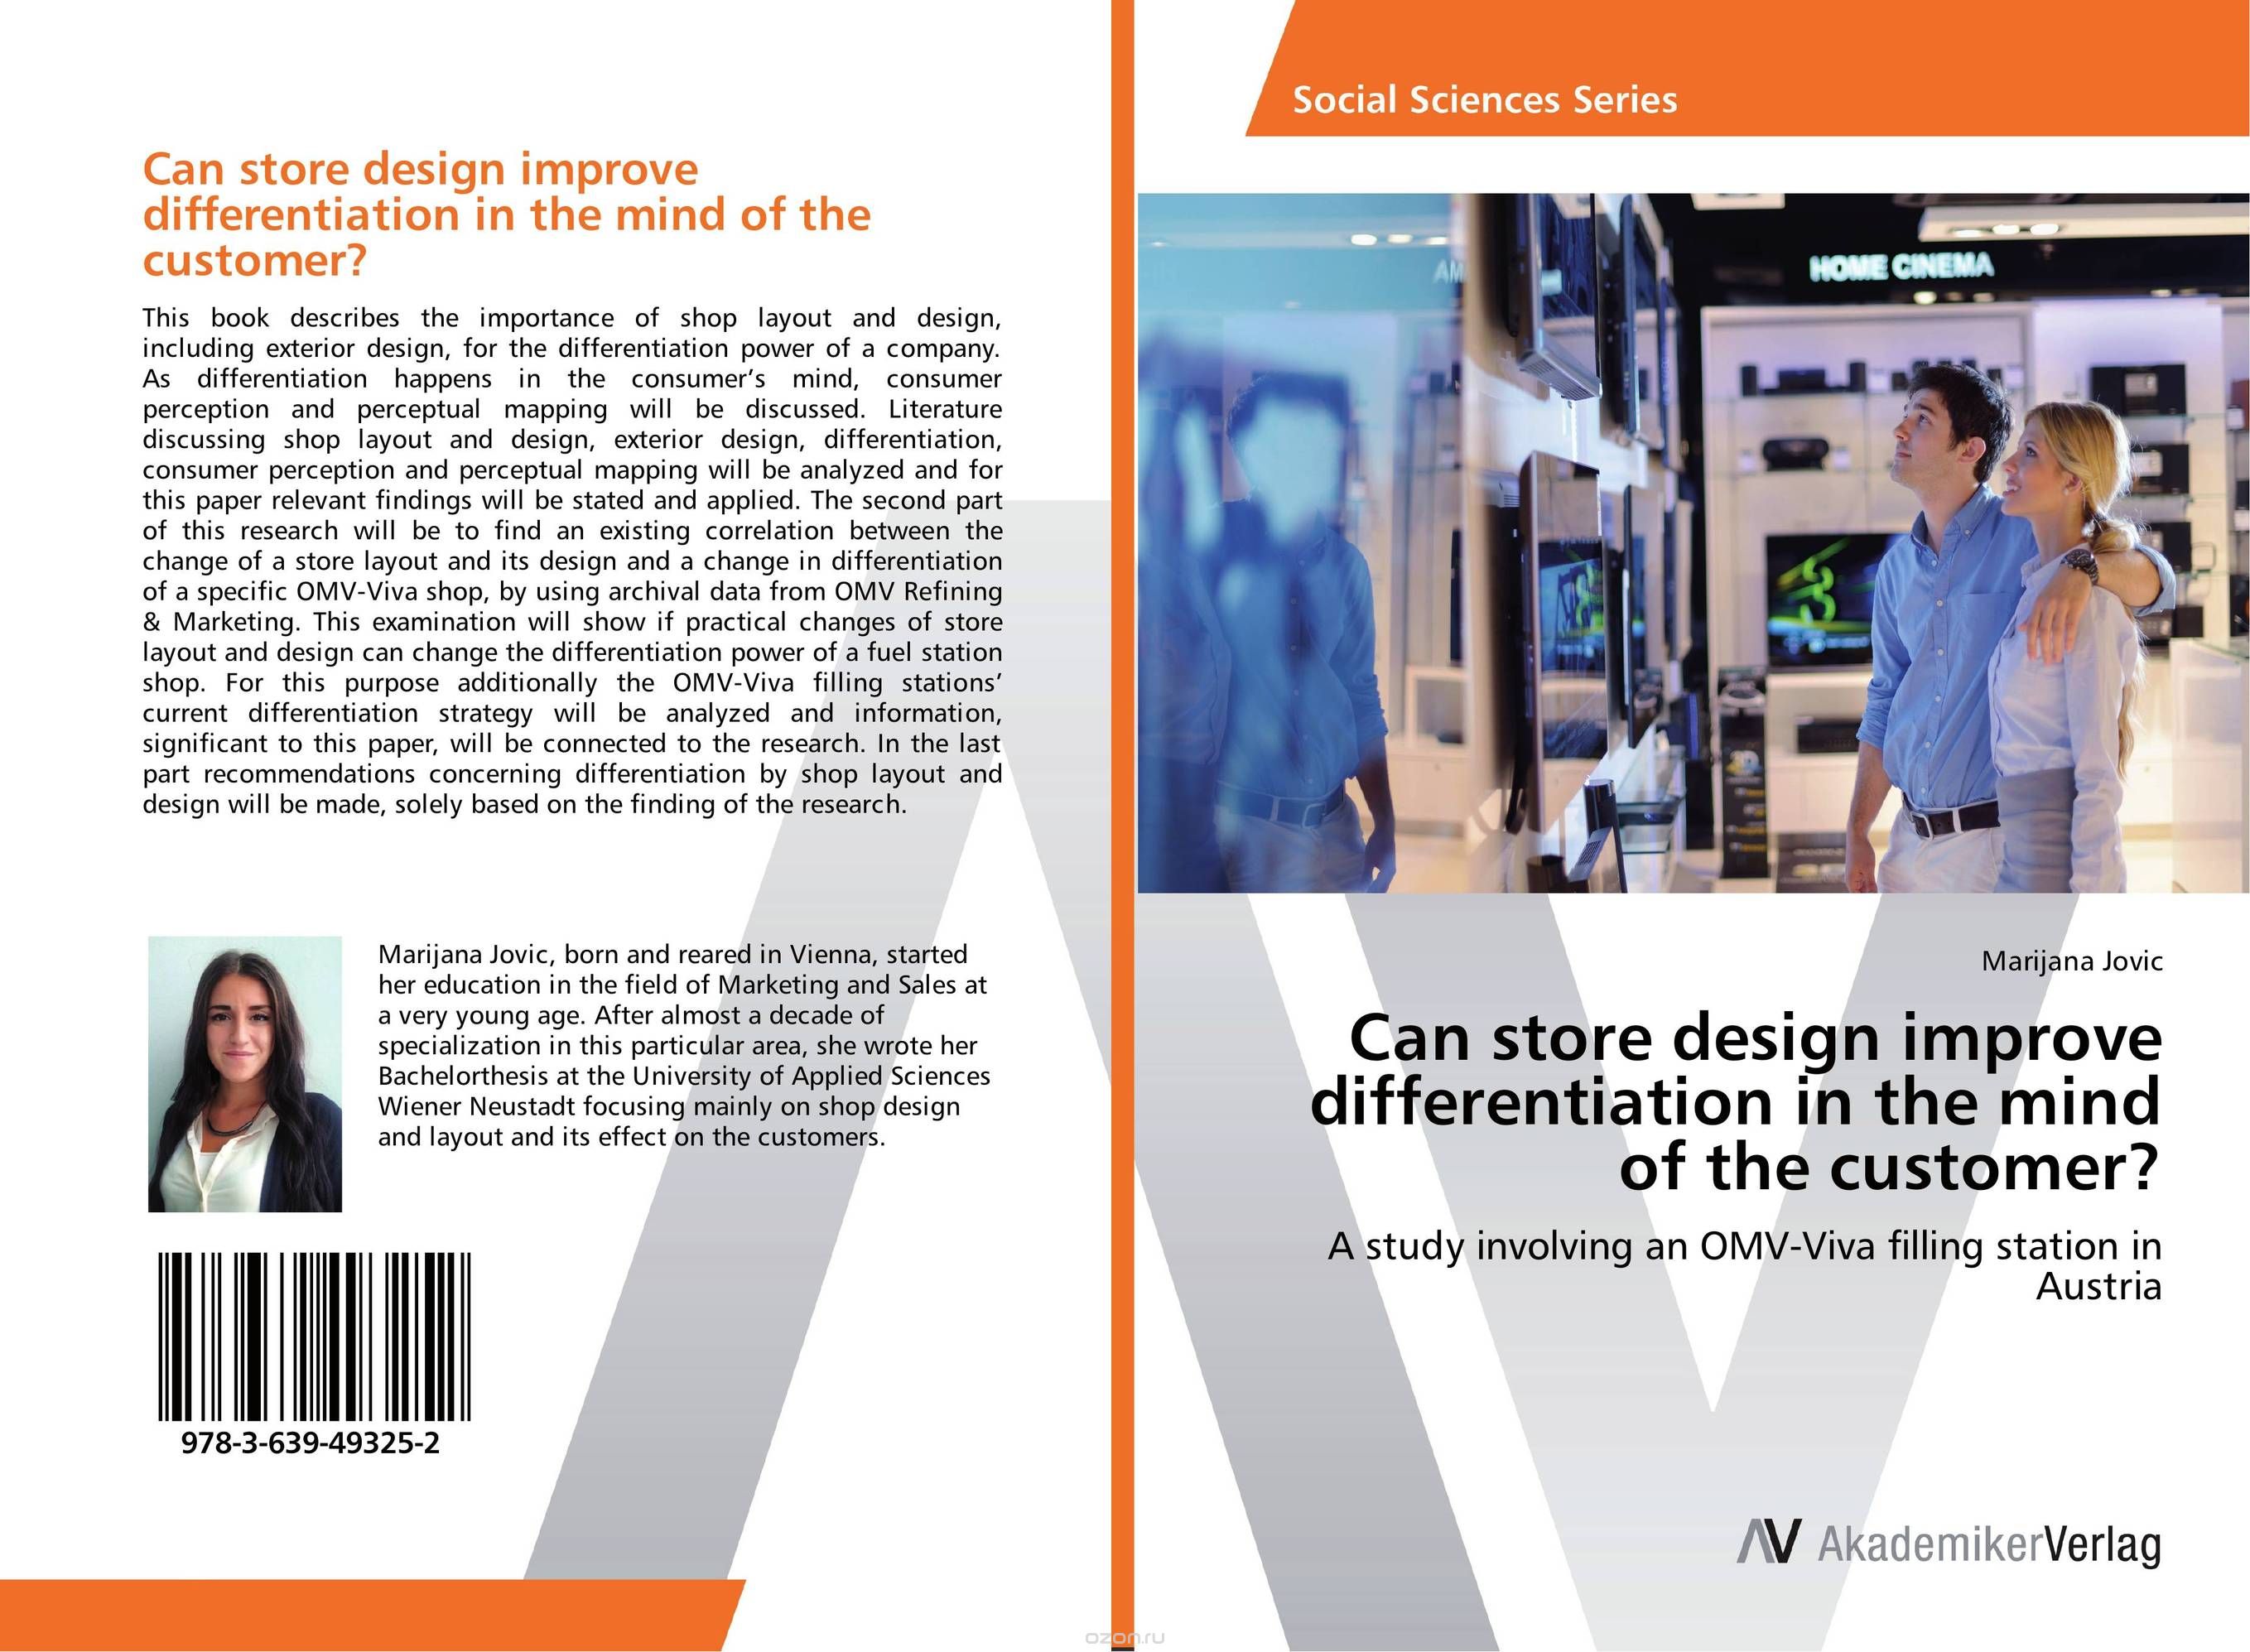 Скачать книгу "Can store design improve differentiation in the mind of the customer?"